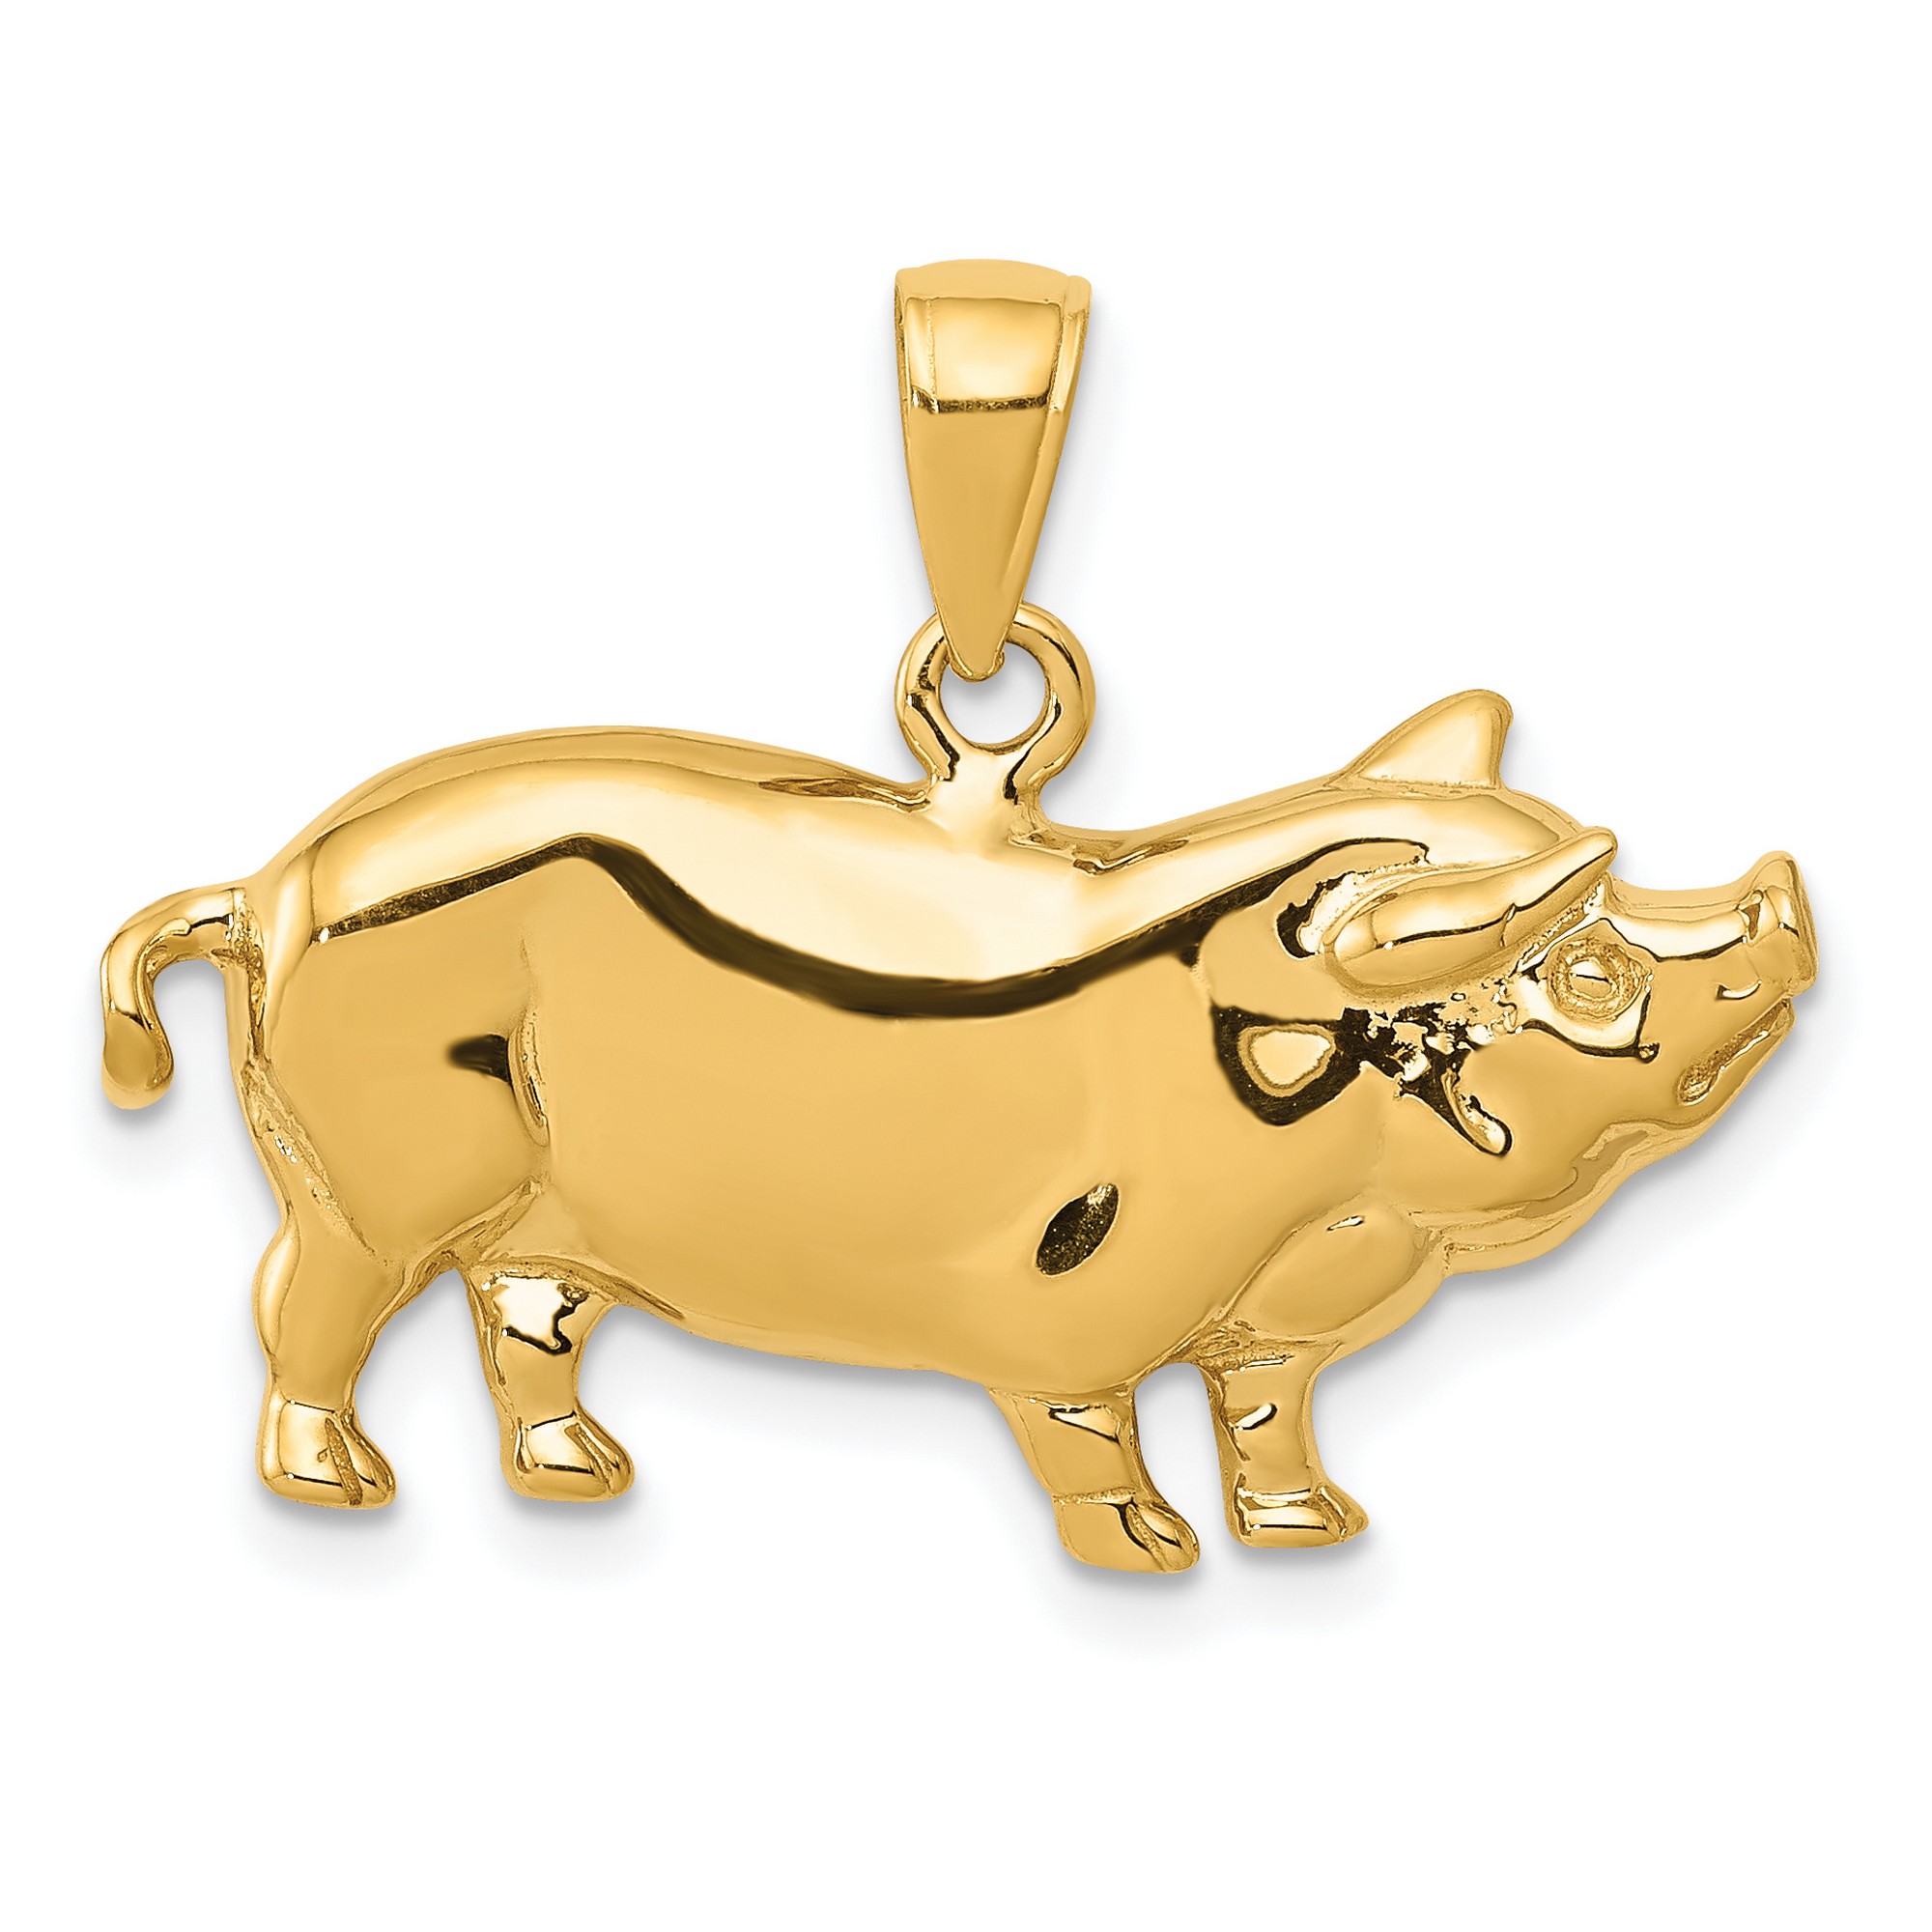 Pre-owned Jewelry Stores Network 14k Yellow Gold Solid Open-back Pot Belly Pig Charm Pendant